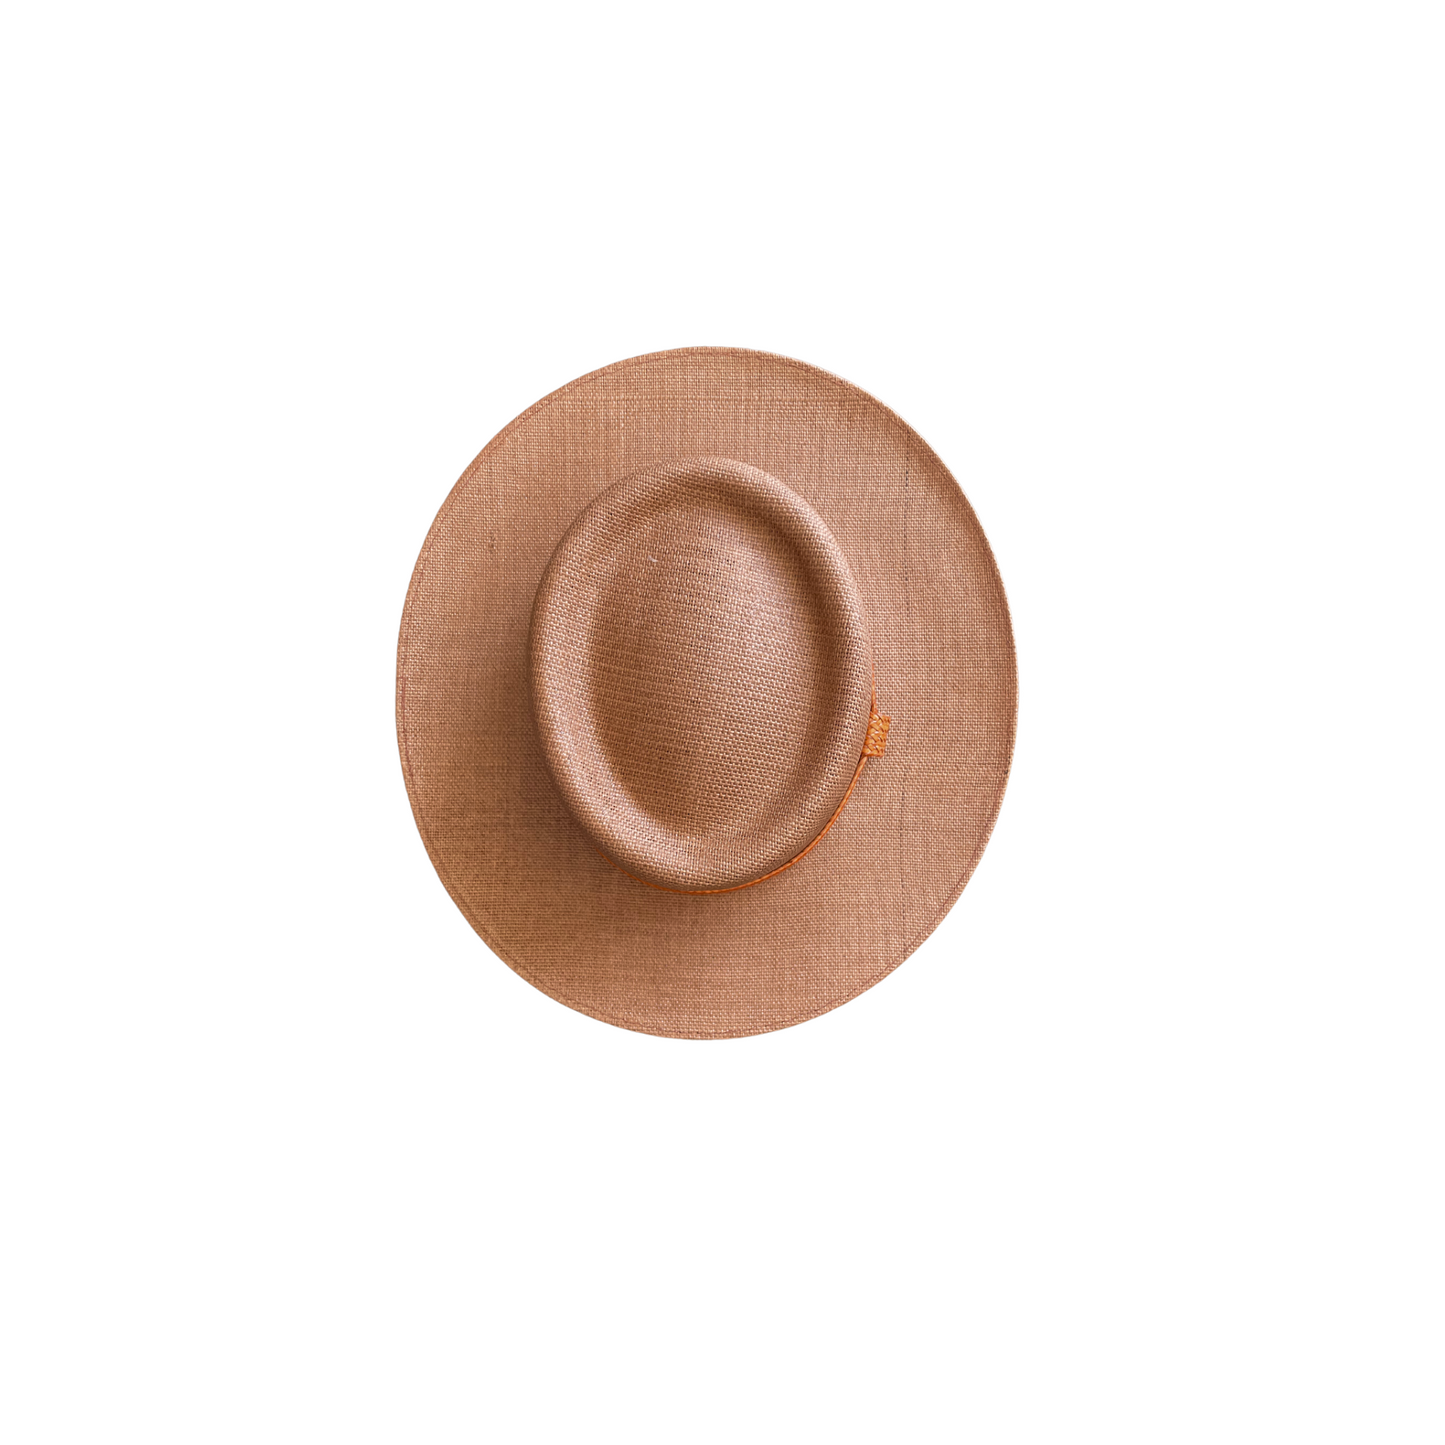 Brown Straw Crowntop with Orange Leather Hat Band